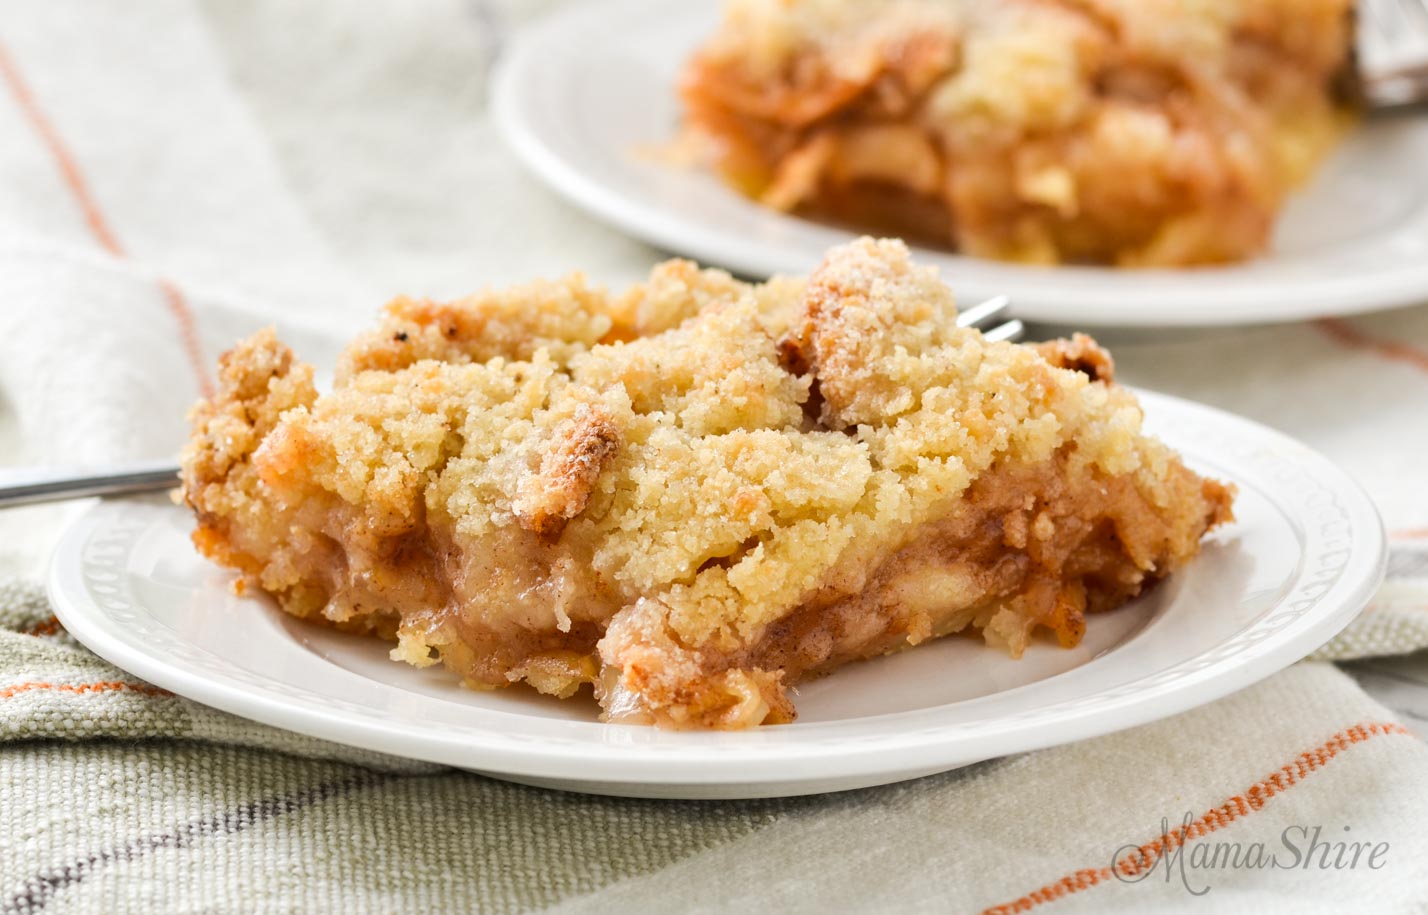 Gluten-free apple slab pie with crumbly topping.